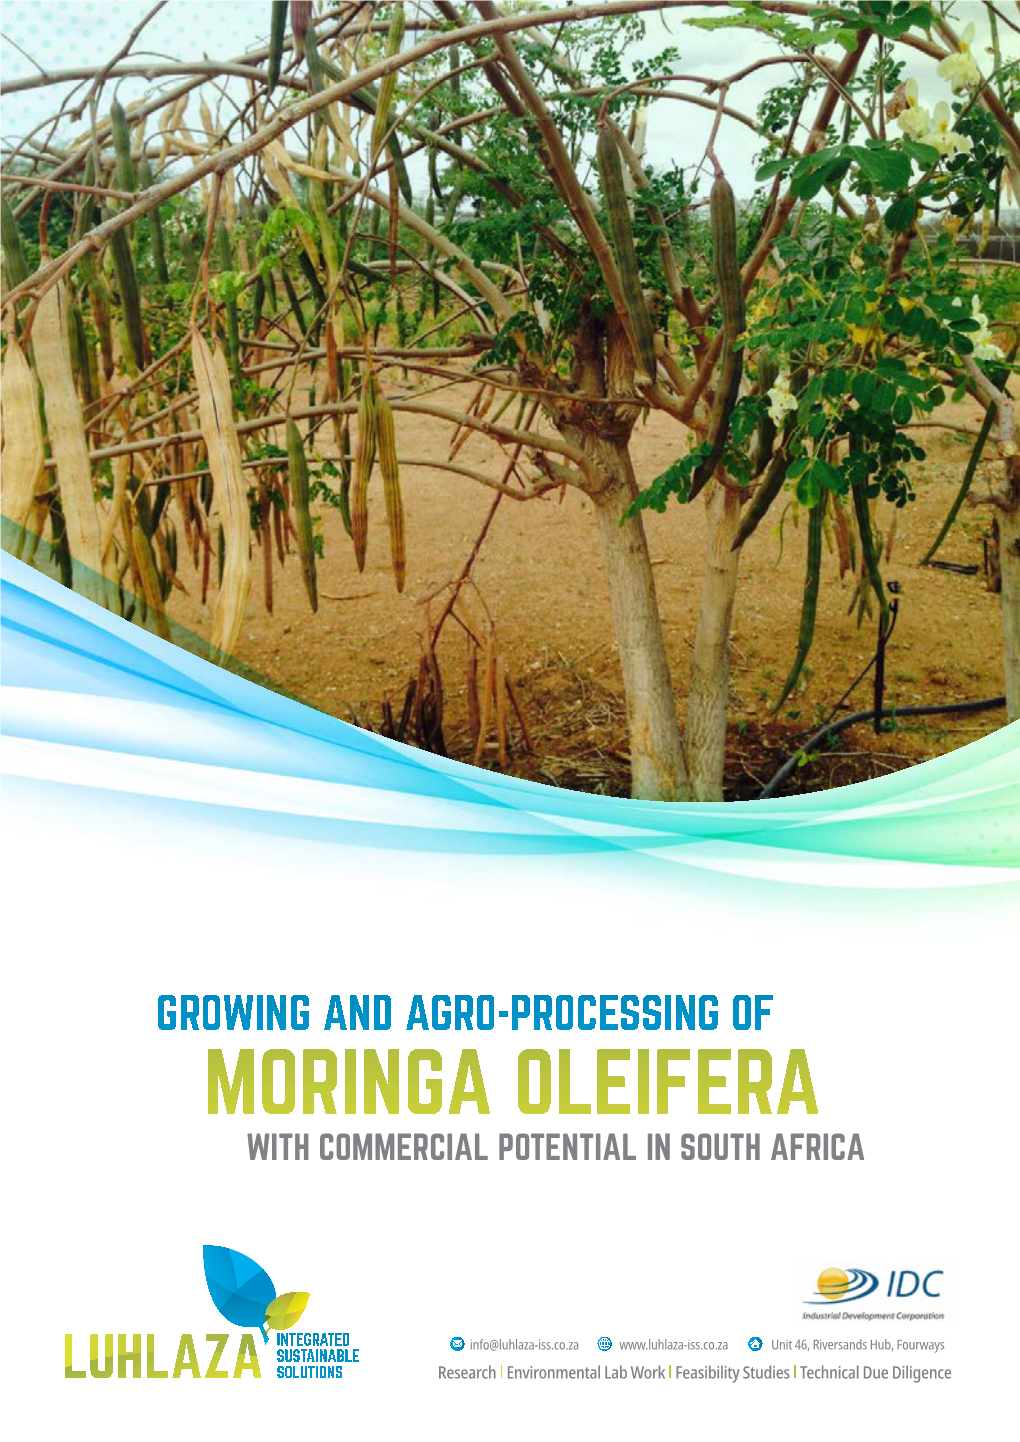 Growing and Agro-Processing of Moringa Oleifera with Commercial Potential in South Africa